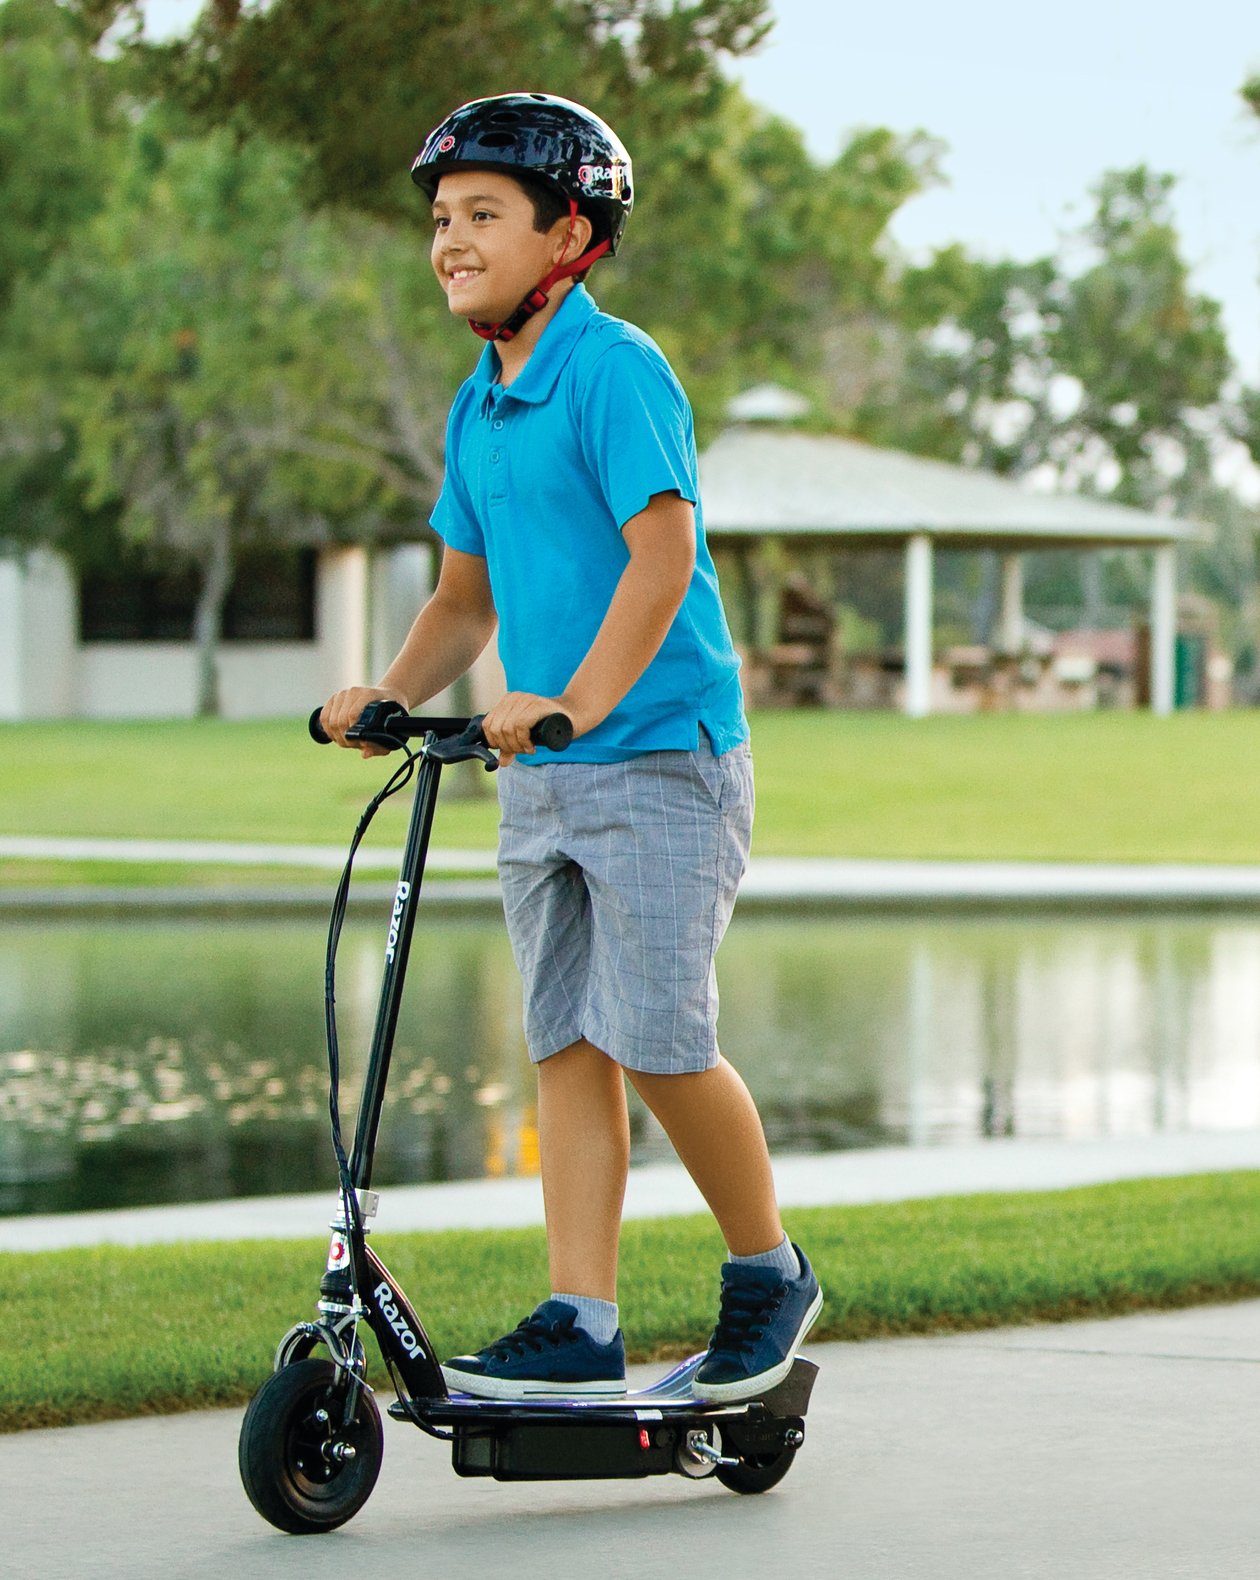 Razor E100 Glow Electric Scooter for Kids Age 8+, LED Light-Up Deck, 8